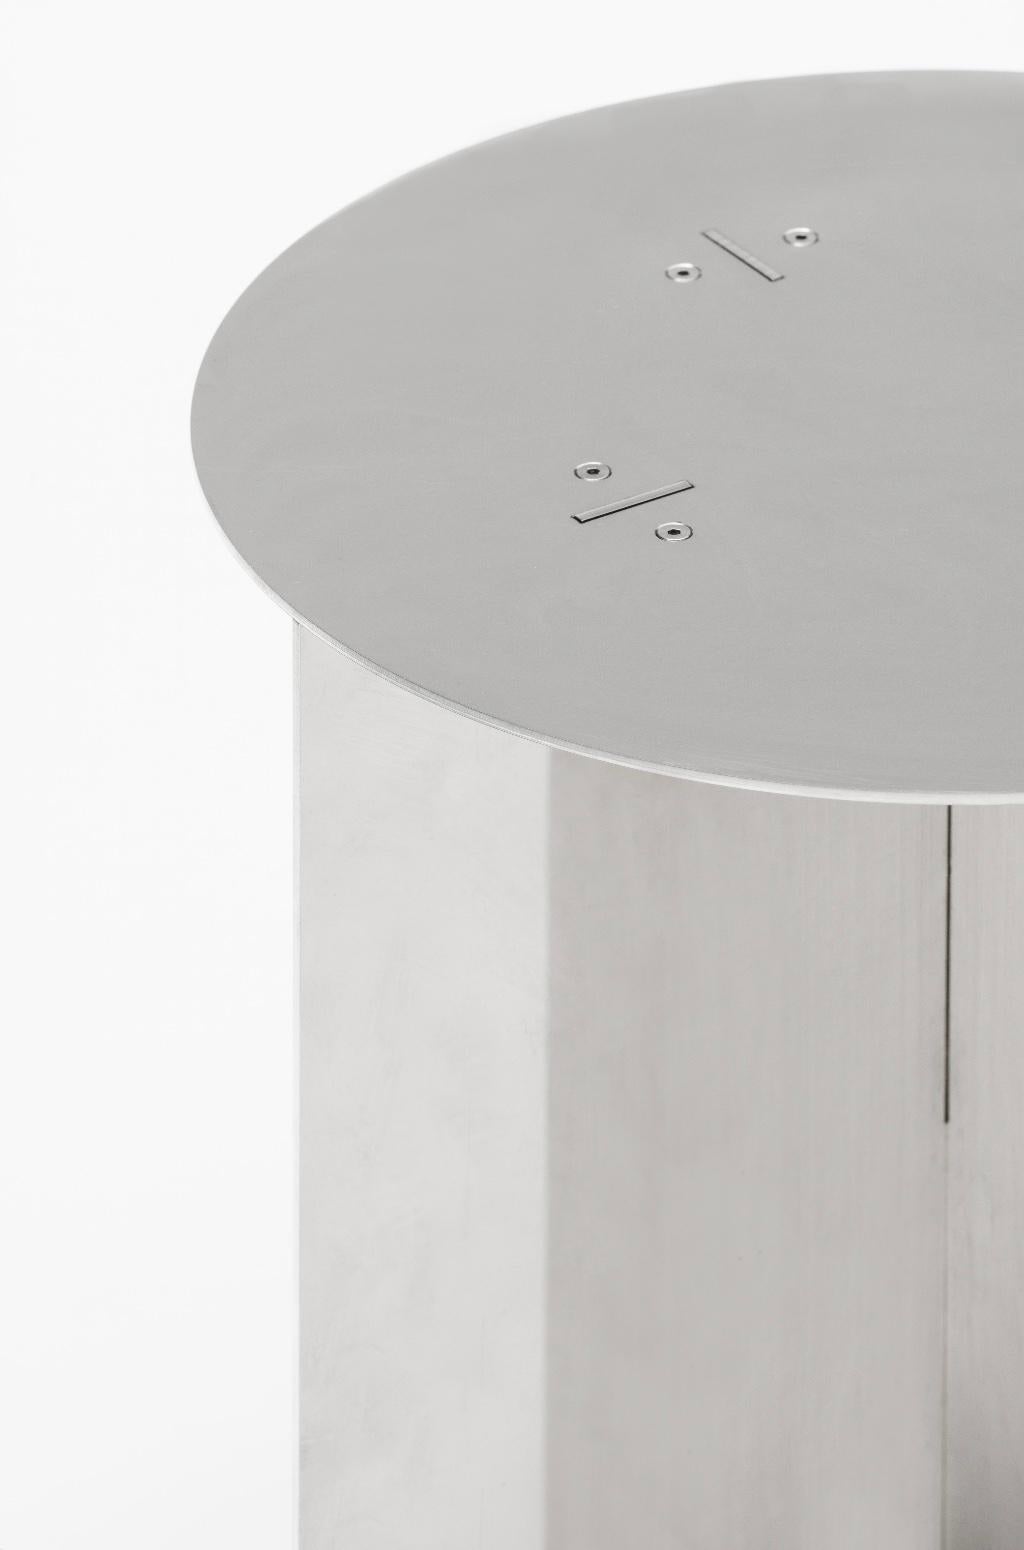 NM06 stool is made entirely of high polidshed stainless steel. The object is structured with 3mm thick steel blades interlocked together.
The idea of working with only one material, and therefore only one supplier, is dictated by the desire to